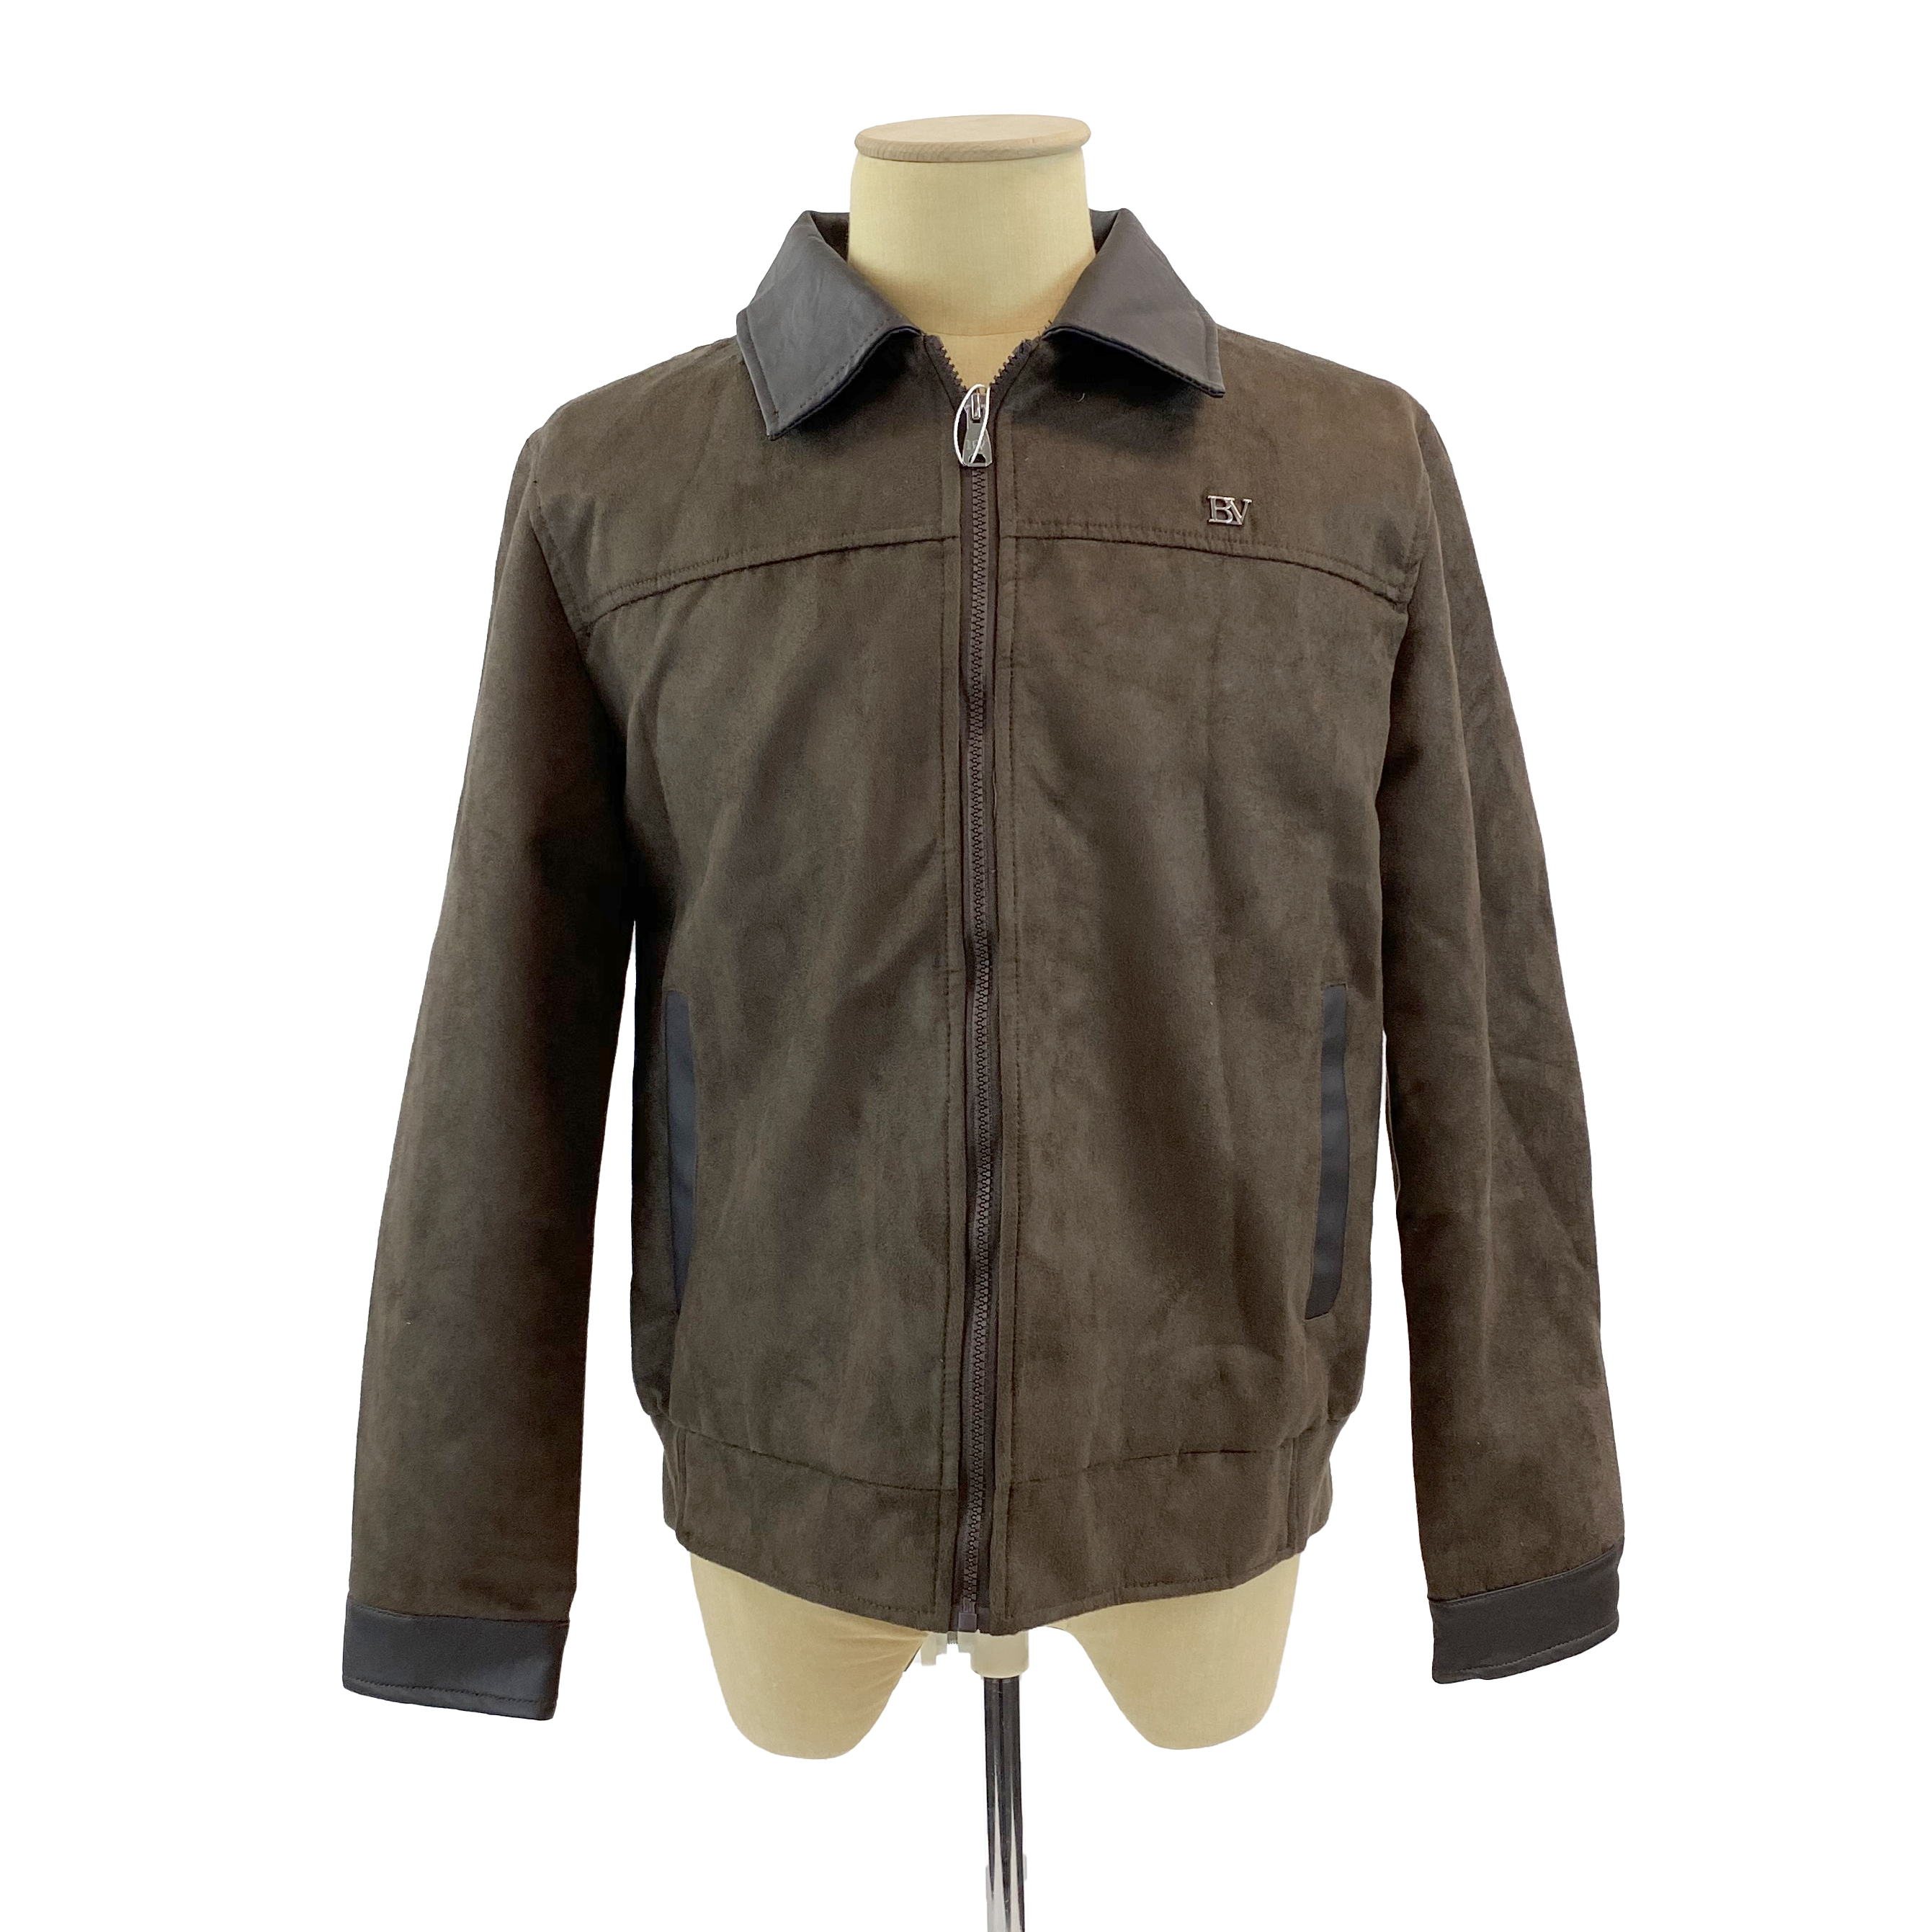 BV Chocolate Brown Suede/Leather Jacket Flat Collar